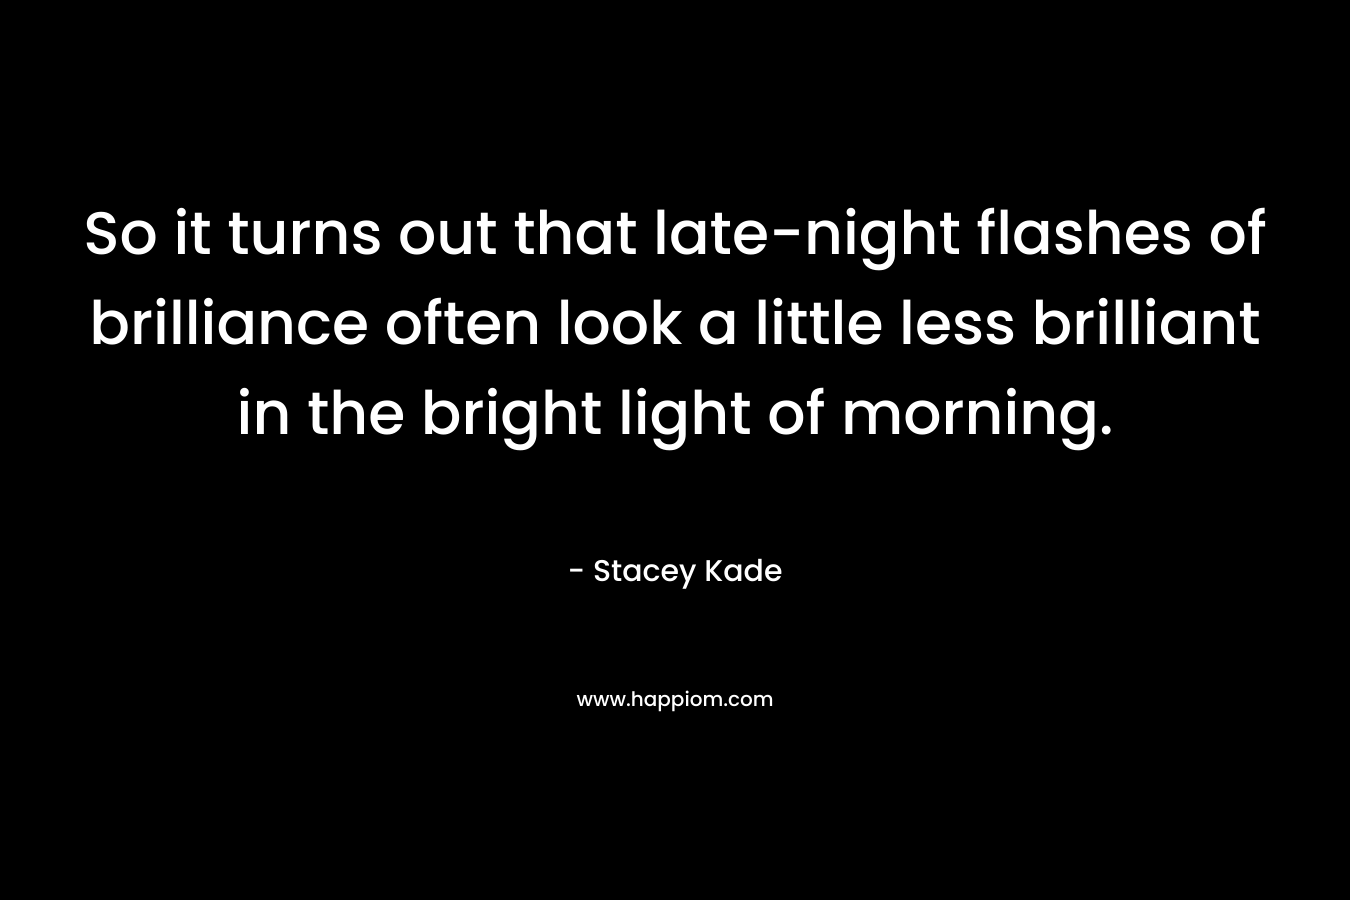 So it turns out that late-night flashes of brilliance often look a little less brilliant in the bright light of morning. – Stacey Kade